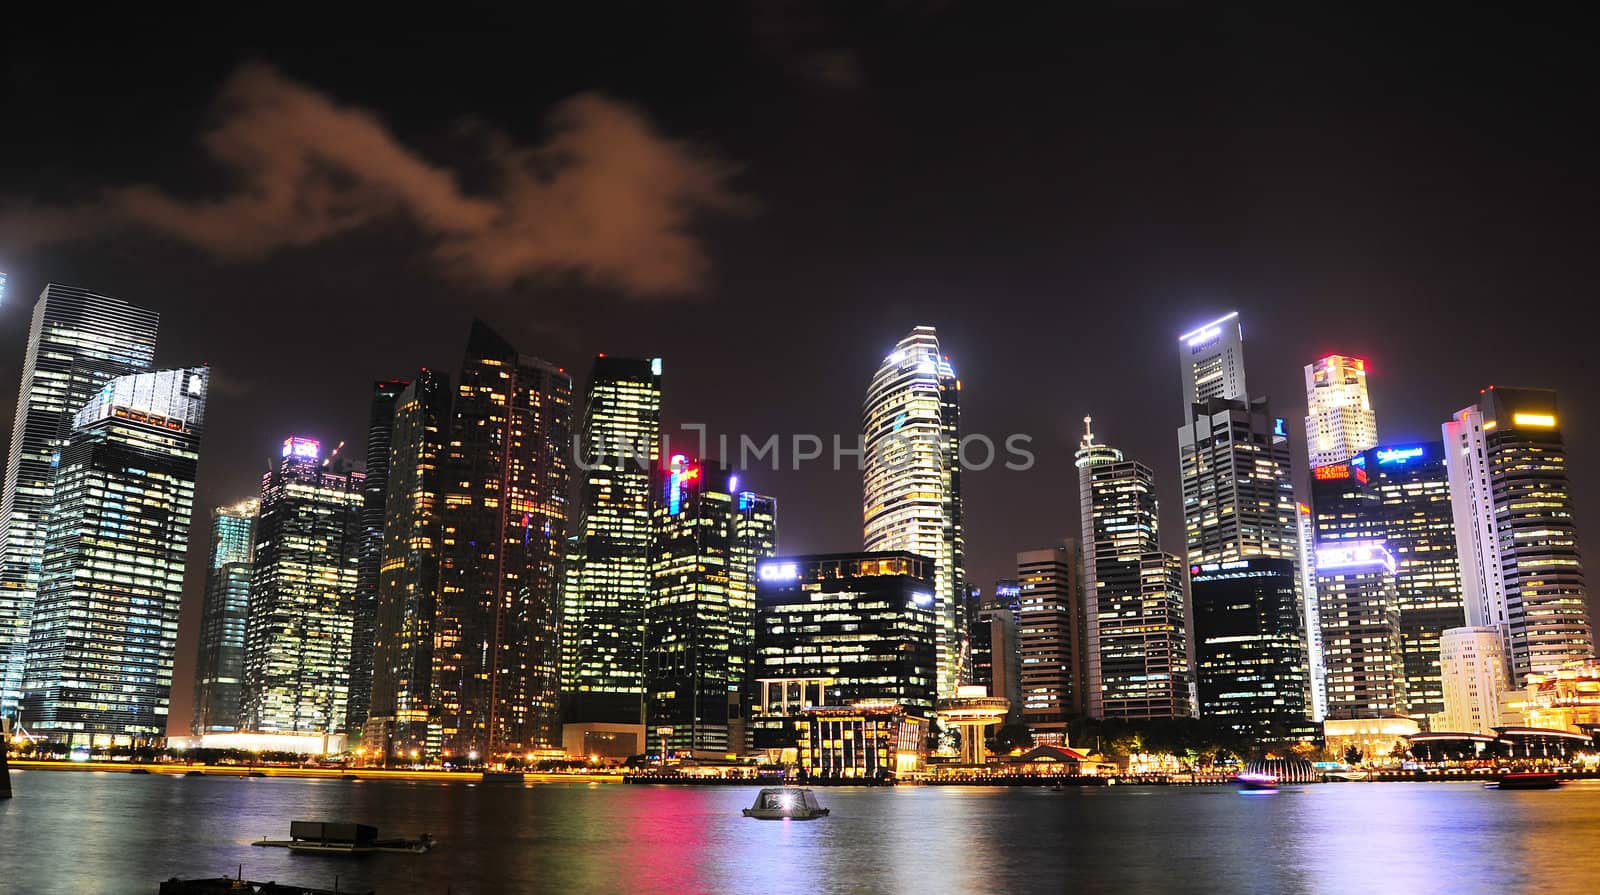  Singapore - March 05, 2013:  Night panorama of Singapore downtown. There are more than 7,000 multinational corporations from United States, Japan and Europe in Singapore. 